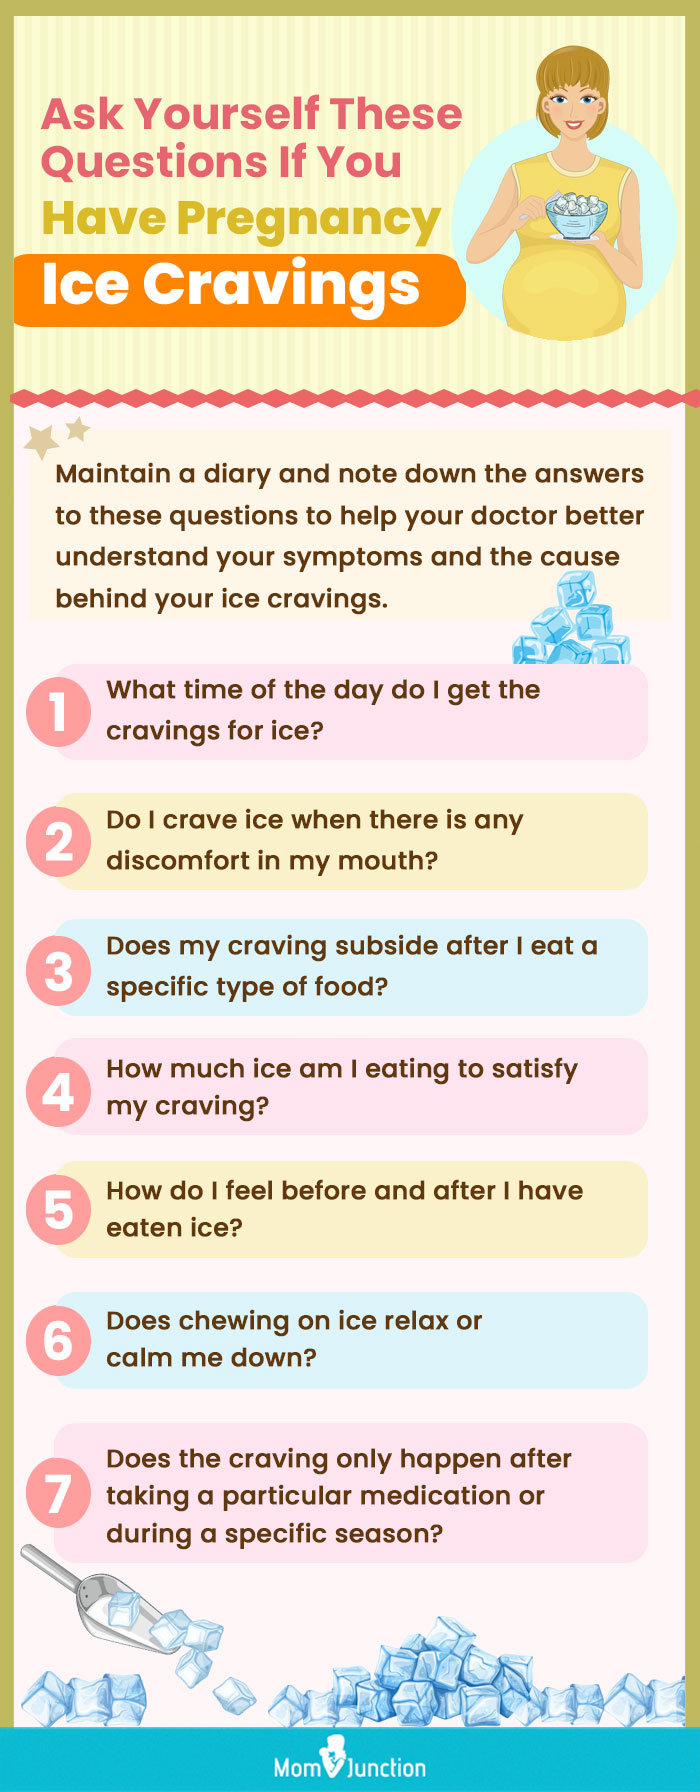 ask yourself these questions if you have pregnancy ice cravings (infographic)